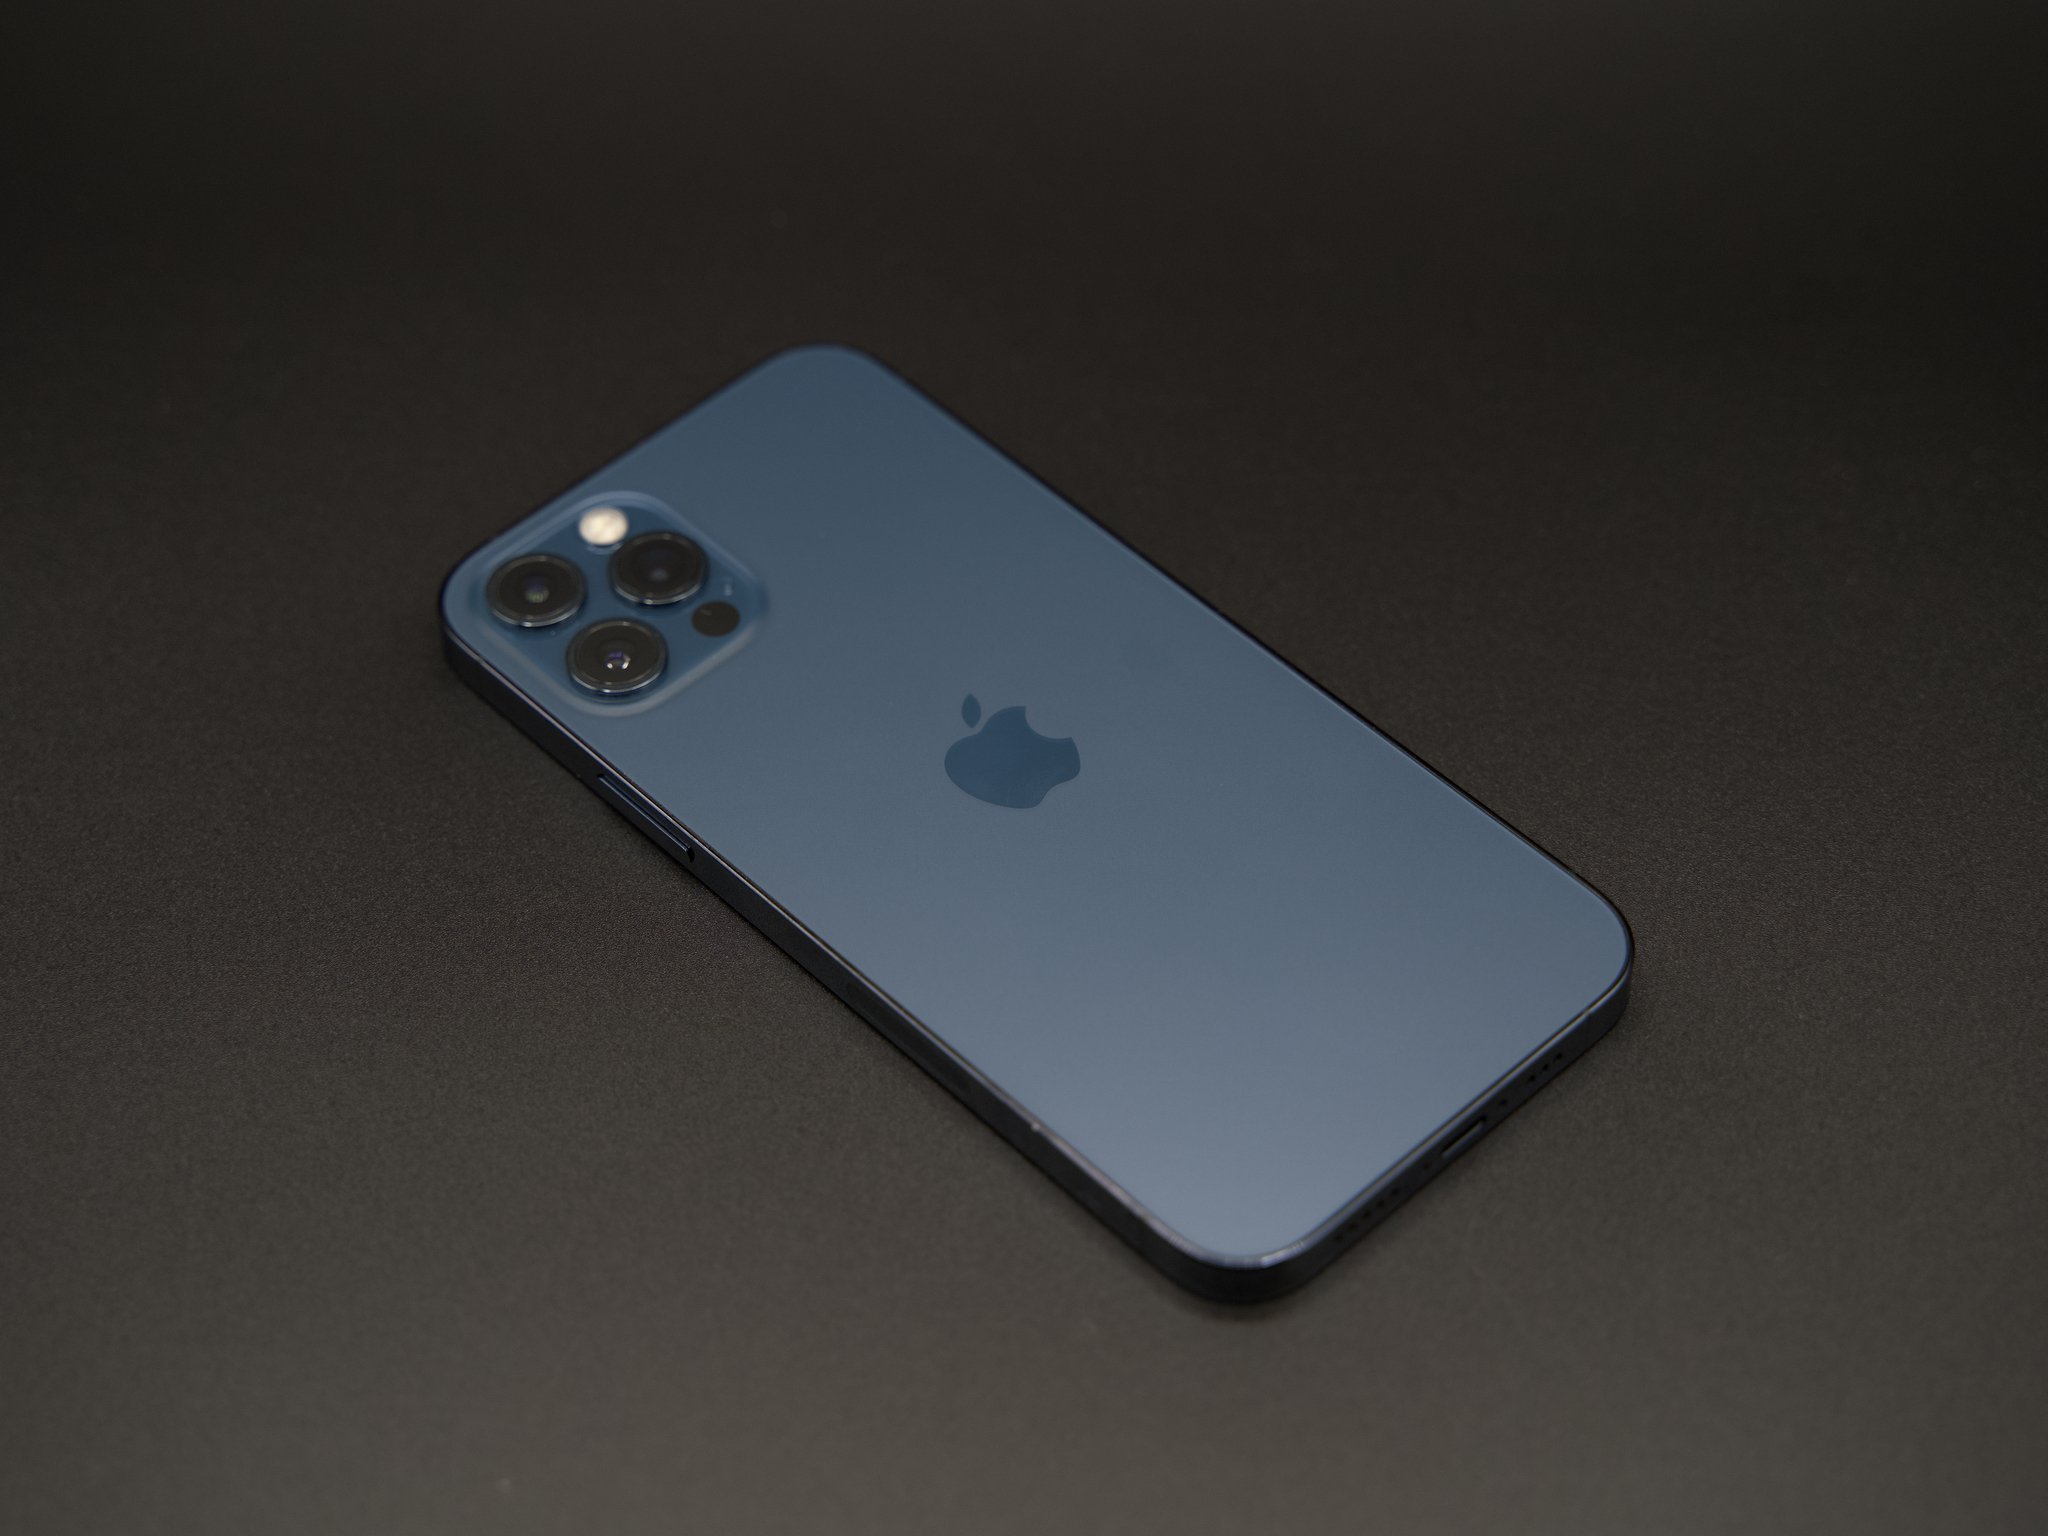 iPhone 12 Pro in Pacific Blue seems to be the most popular iPhone | iMore